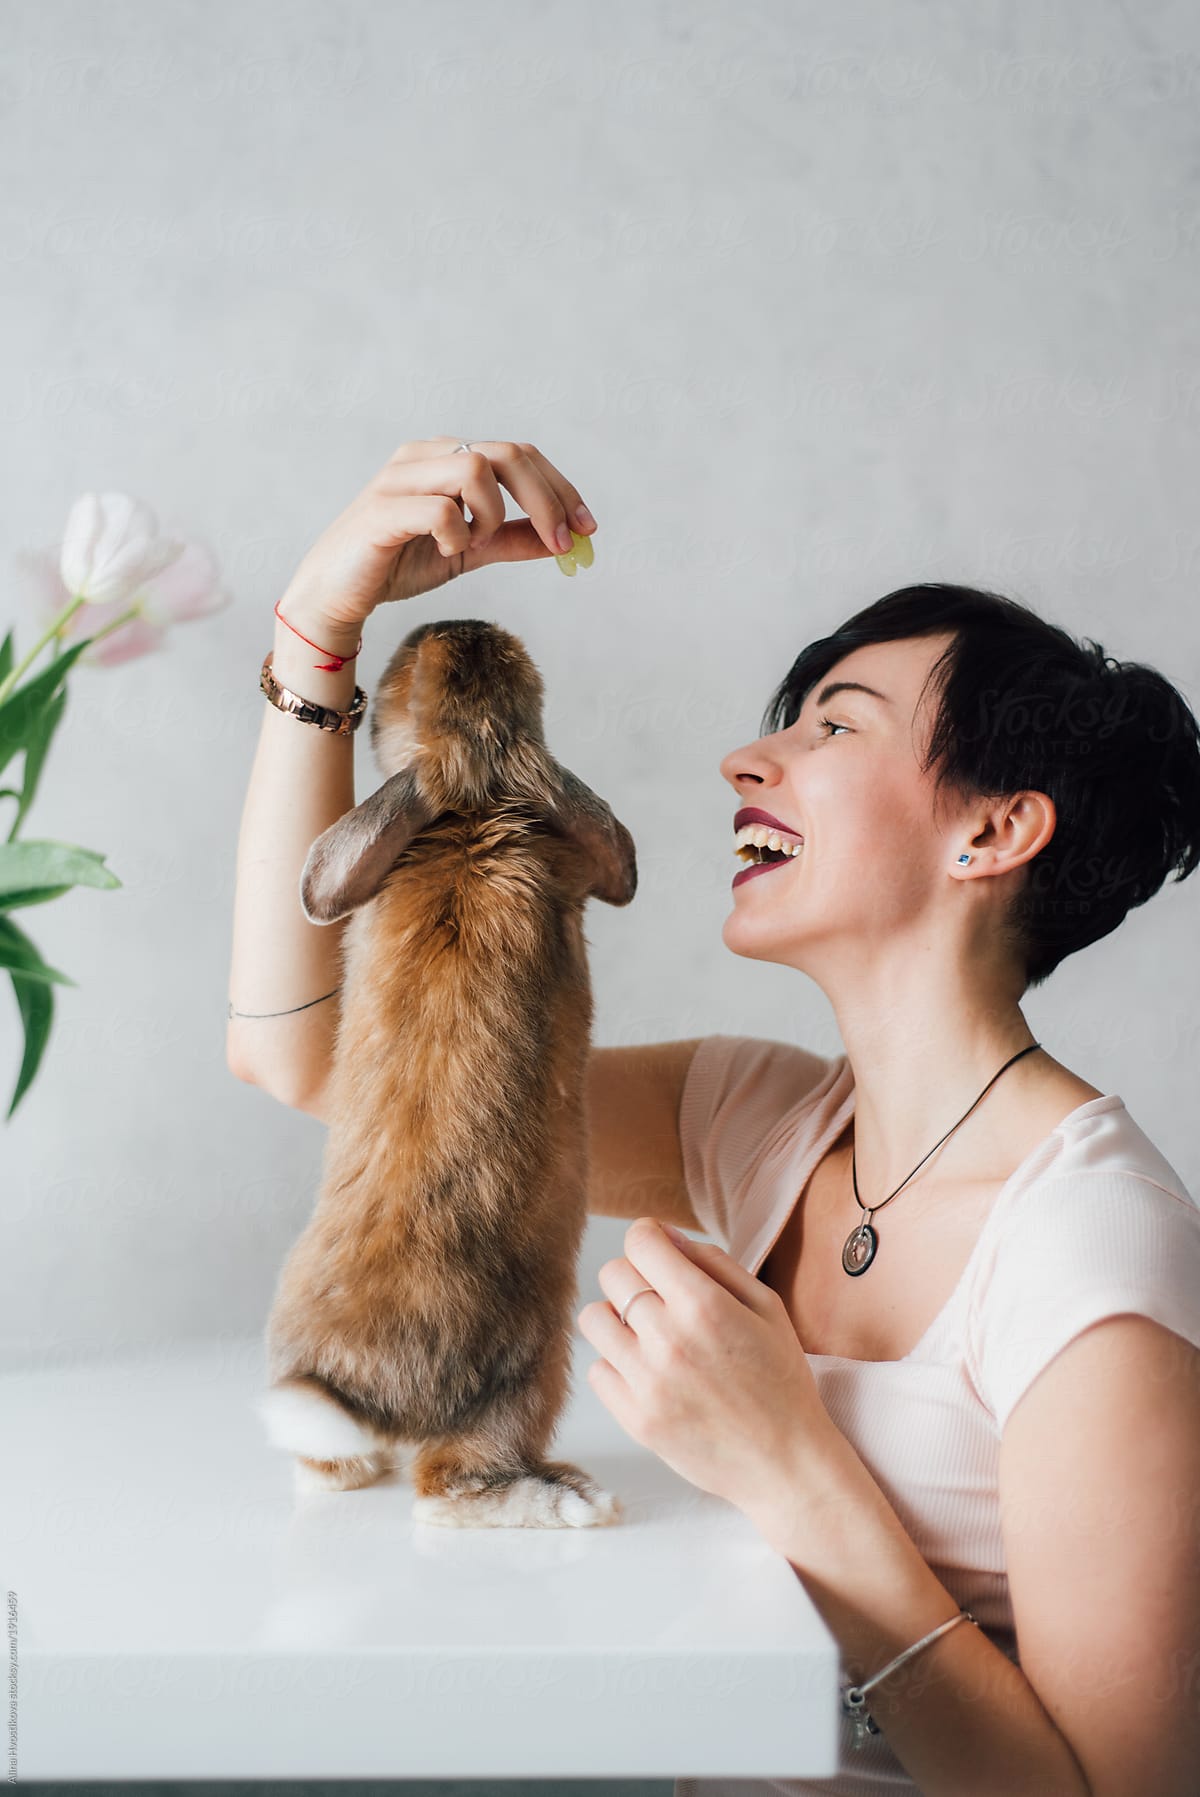 Smiling woman with cute hare